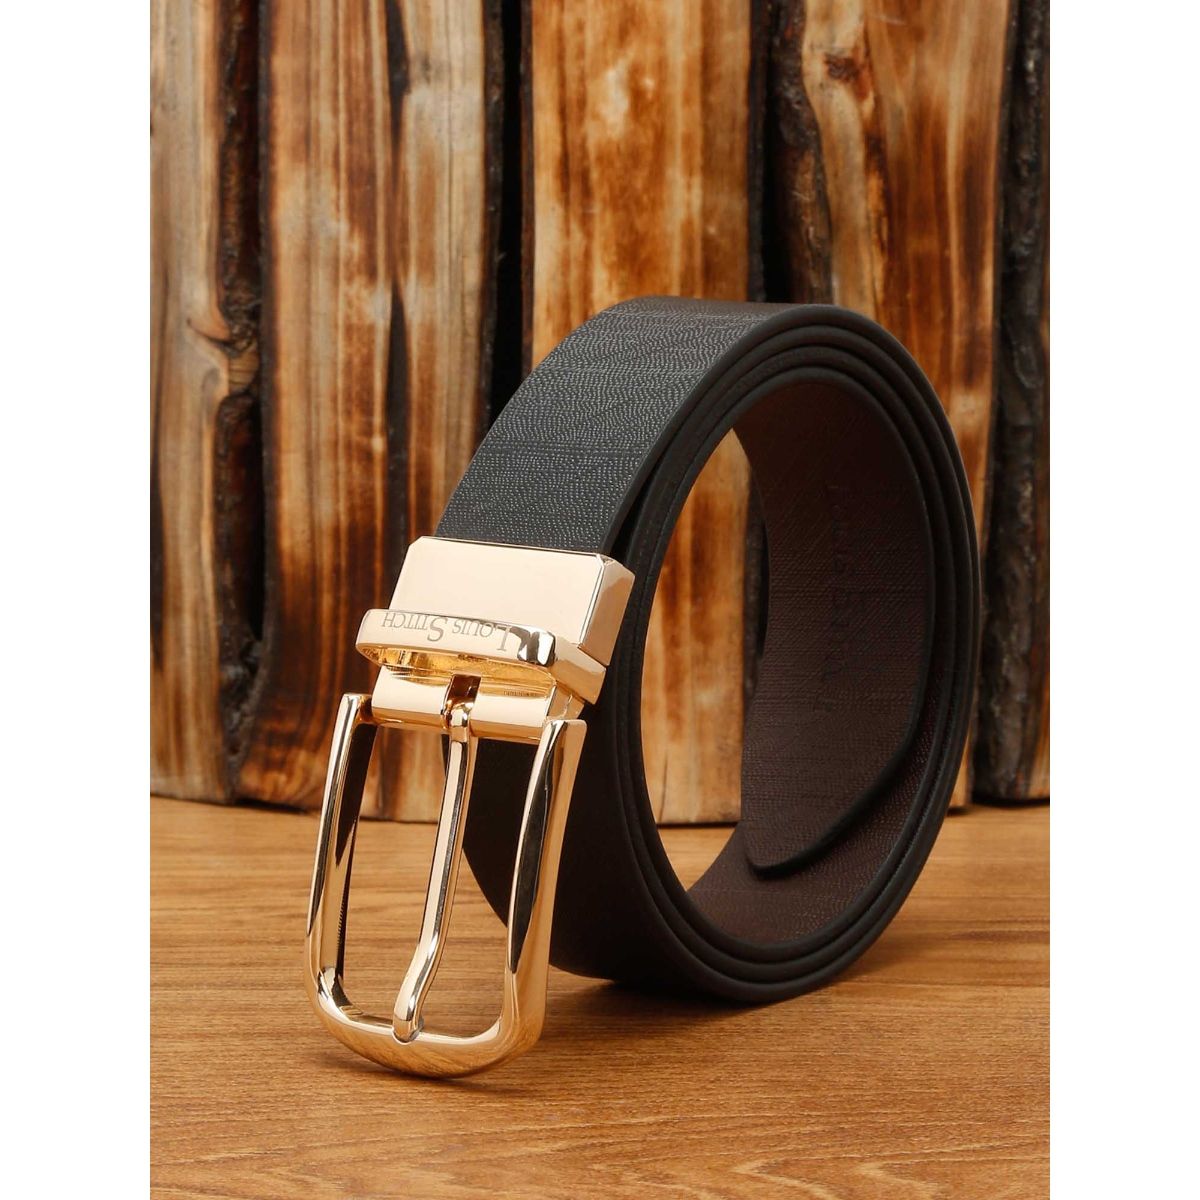 Buy online Golden Leather Belt from Accessories for Men by Louis Stitch for  ₹1099 at 56% off